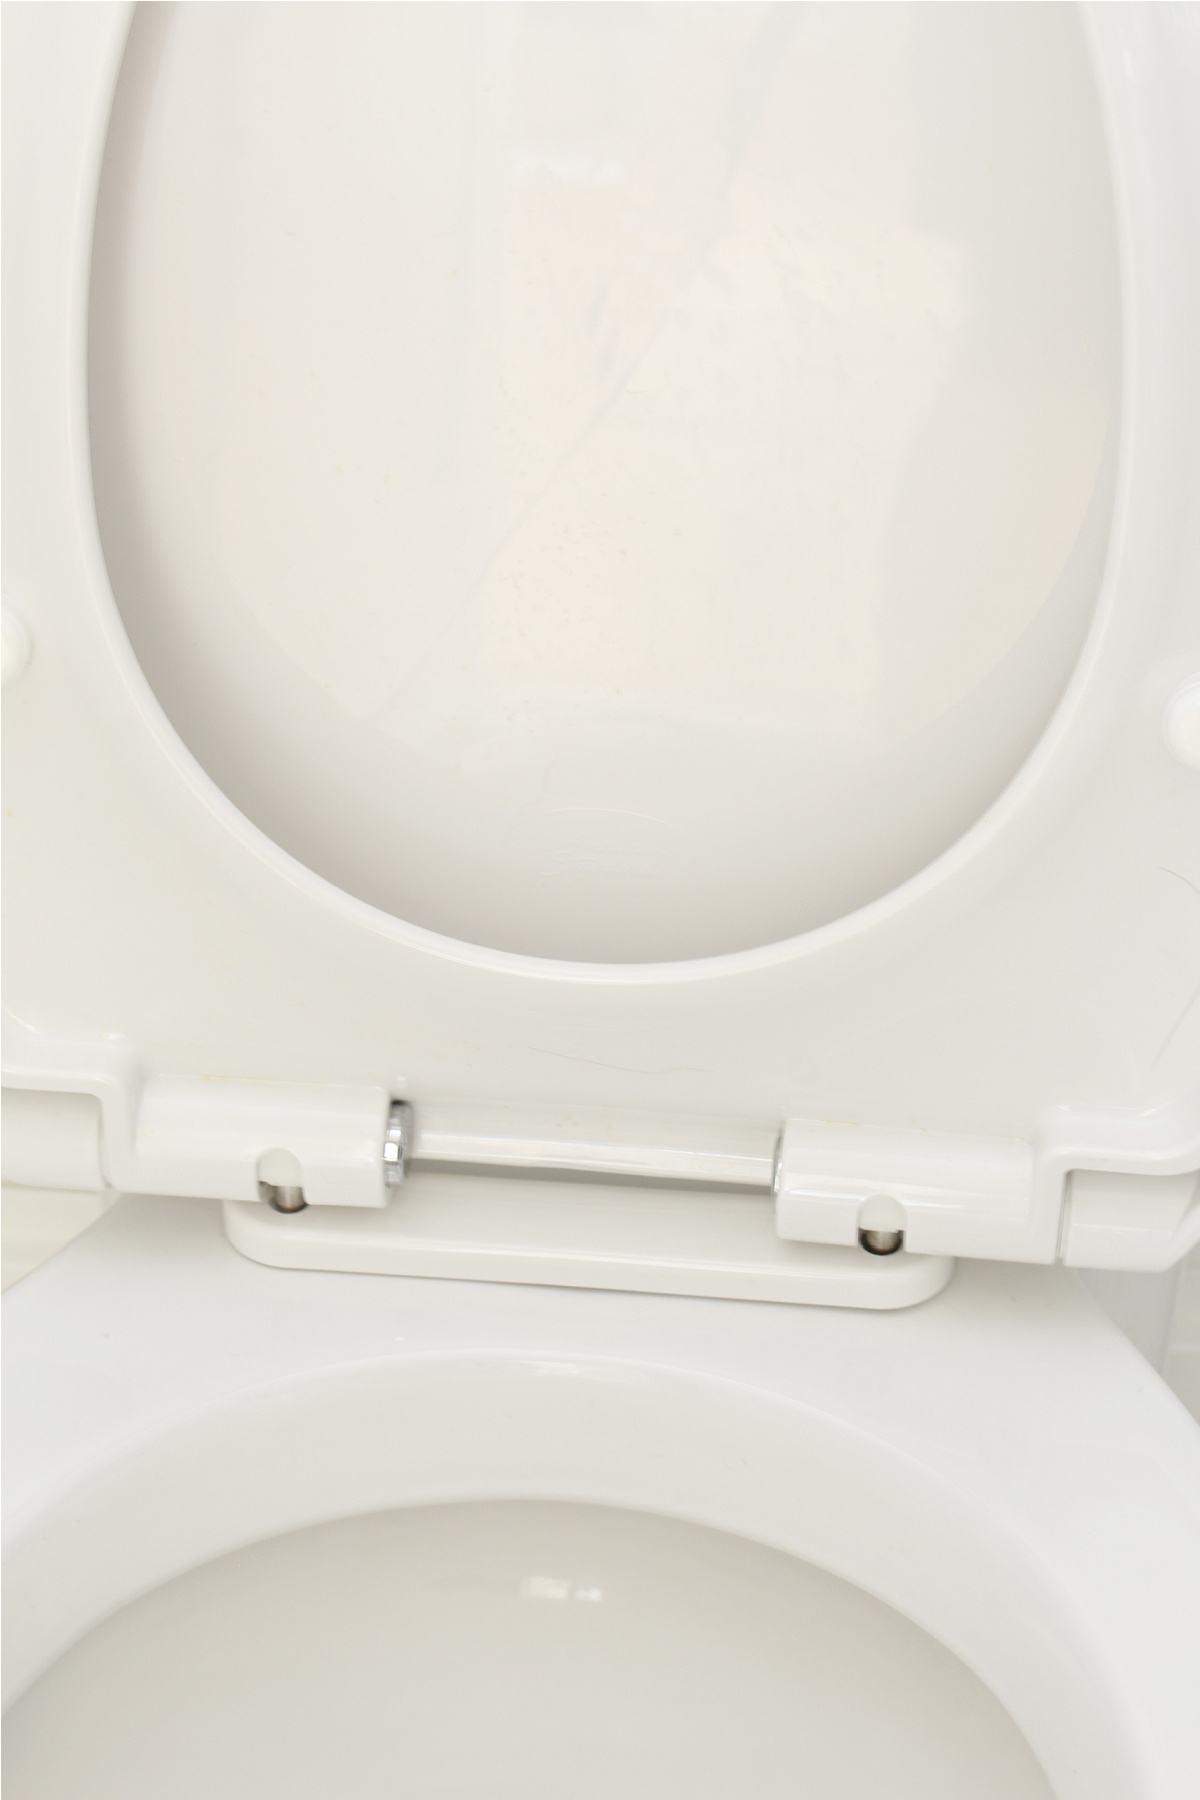 https://www.cleanandscentsible.com/wp-content/uploads/2021/07/removeable-toilet-seat-Clean-and-Scentsible.jpg